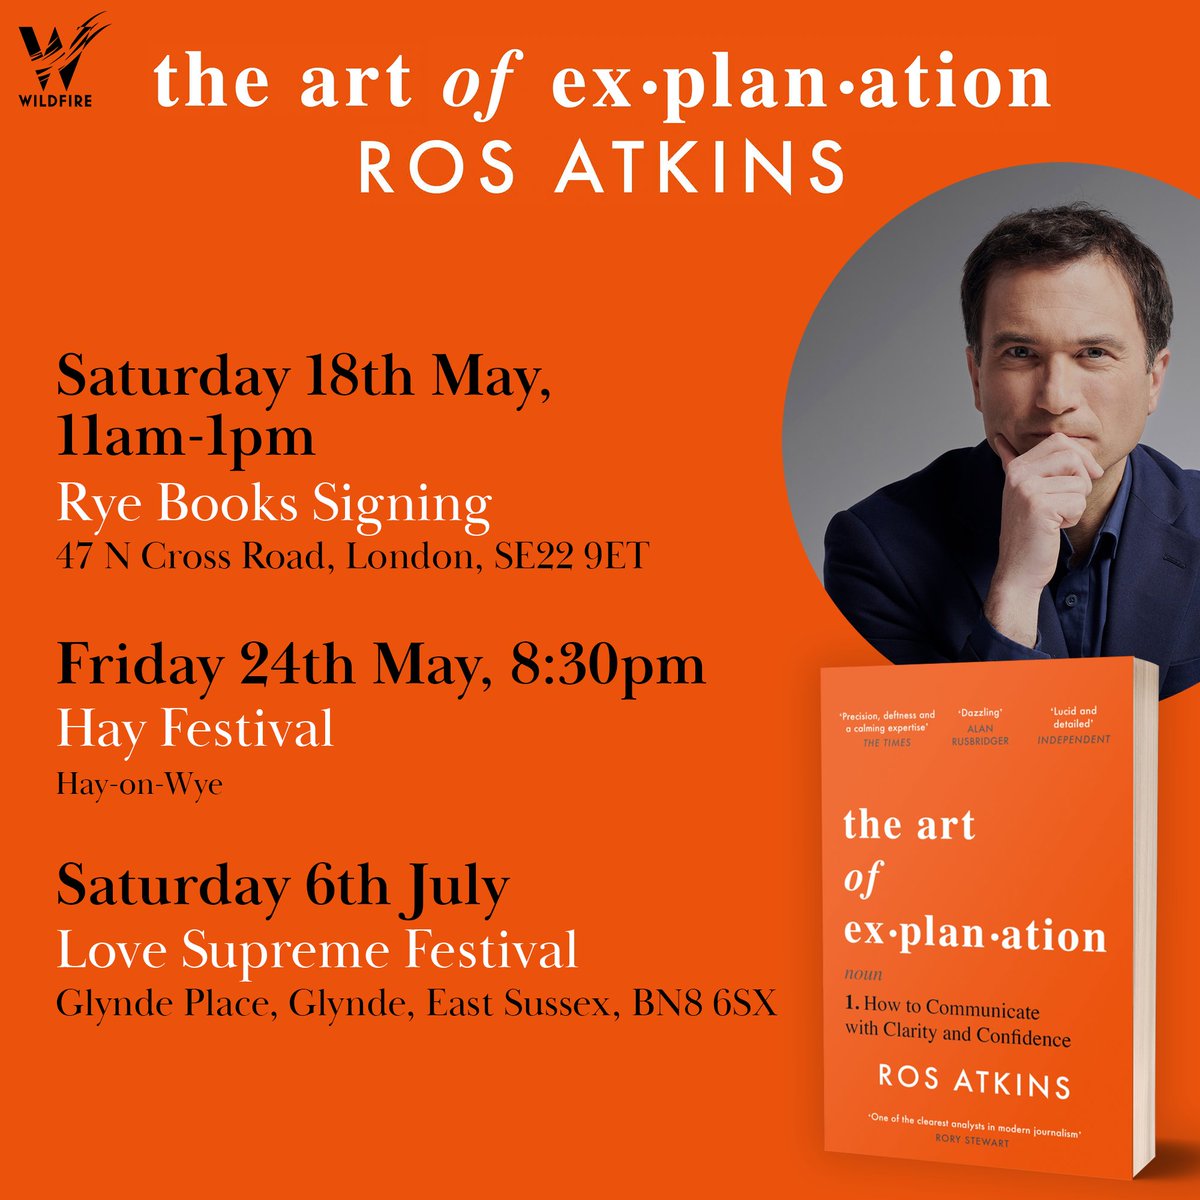 If you're in SE London on Saturday morning, I'll be at Rye Books on North Cross Rd in East Dulwich from 11-1 (it's right by North Cross Rd market which will be in full swing). I'll be signing copies of the paperback of The Art of Explanation. Hope to see some of you there.